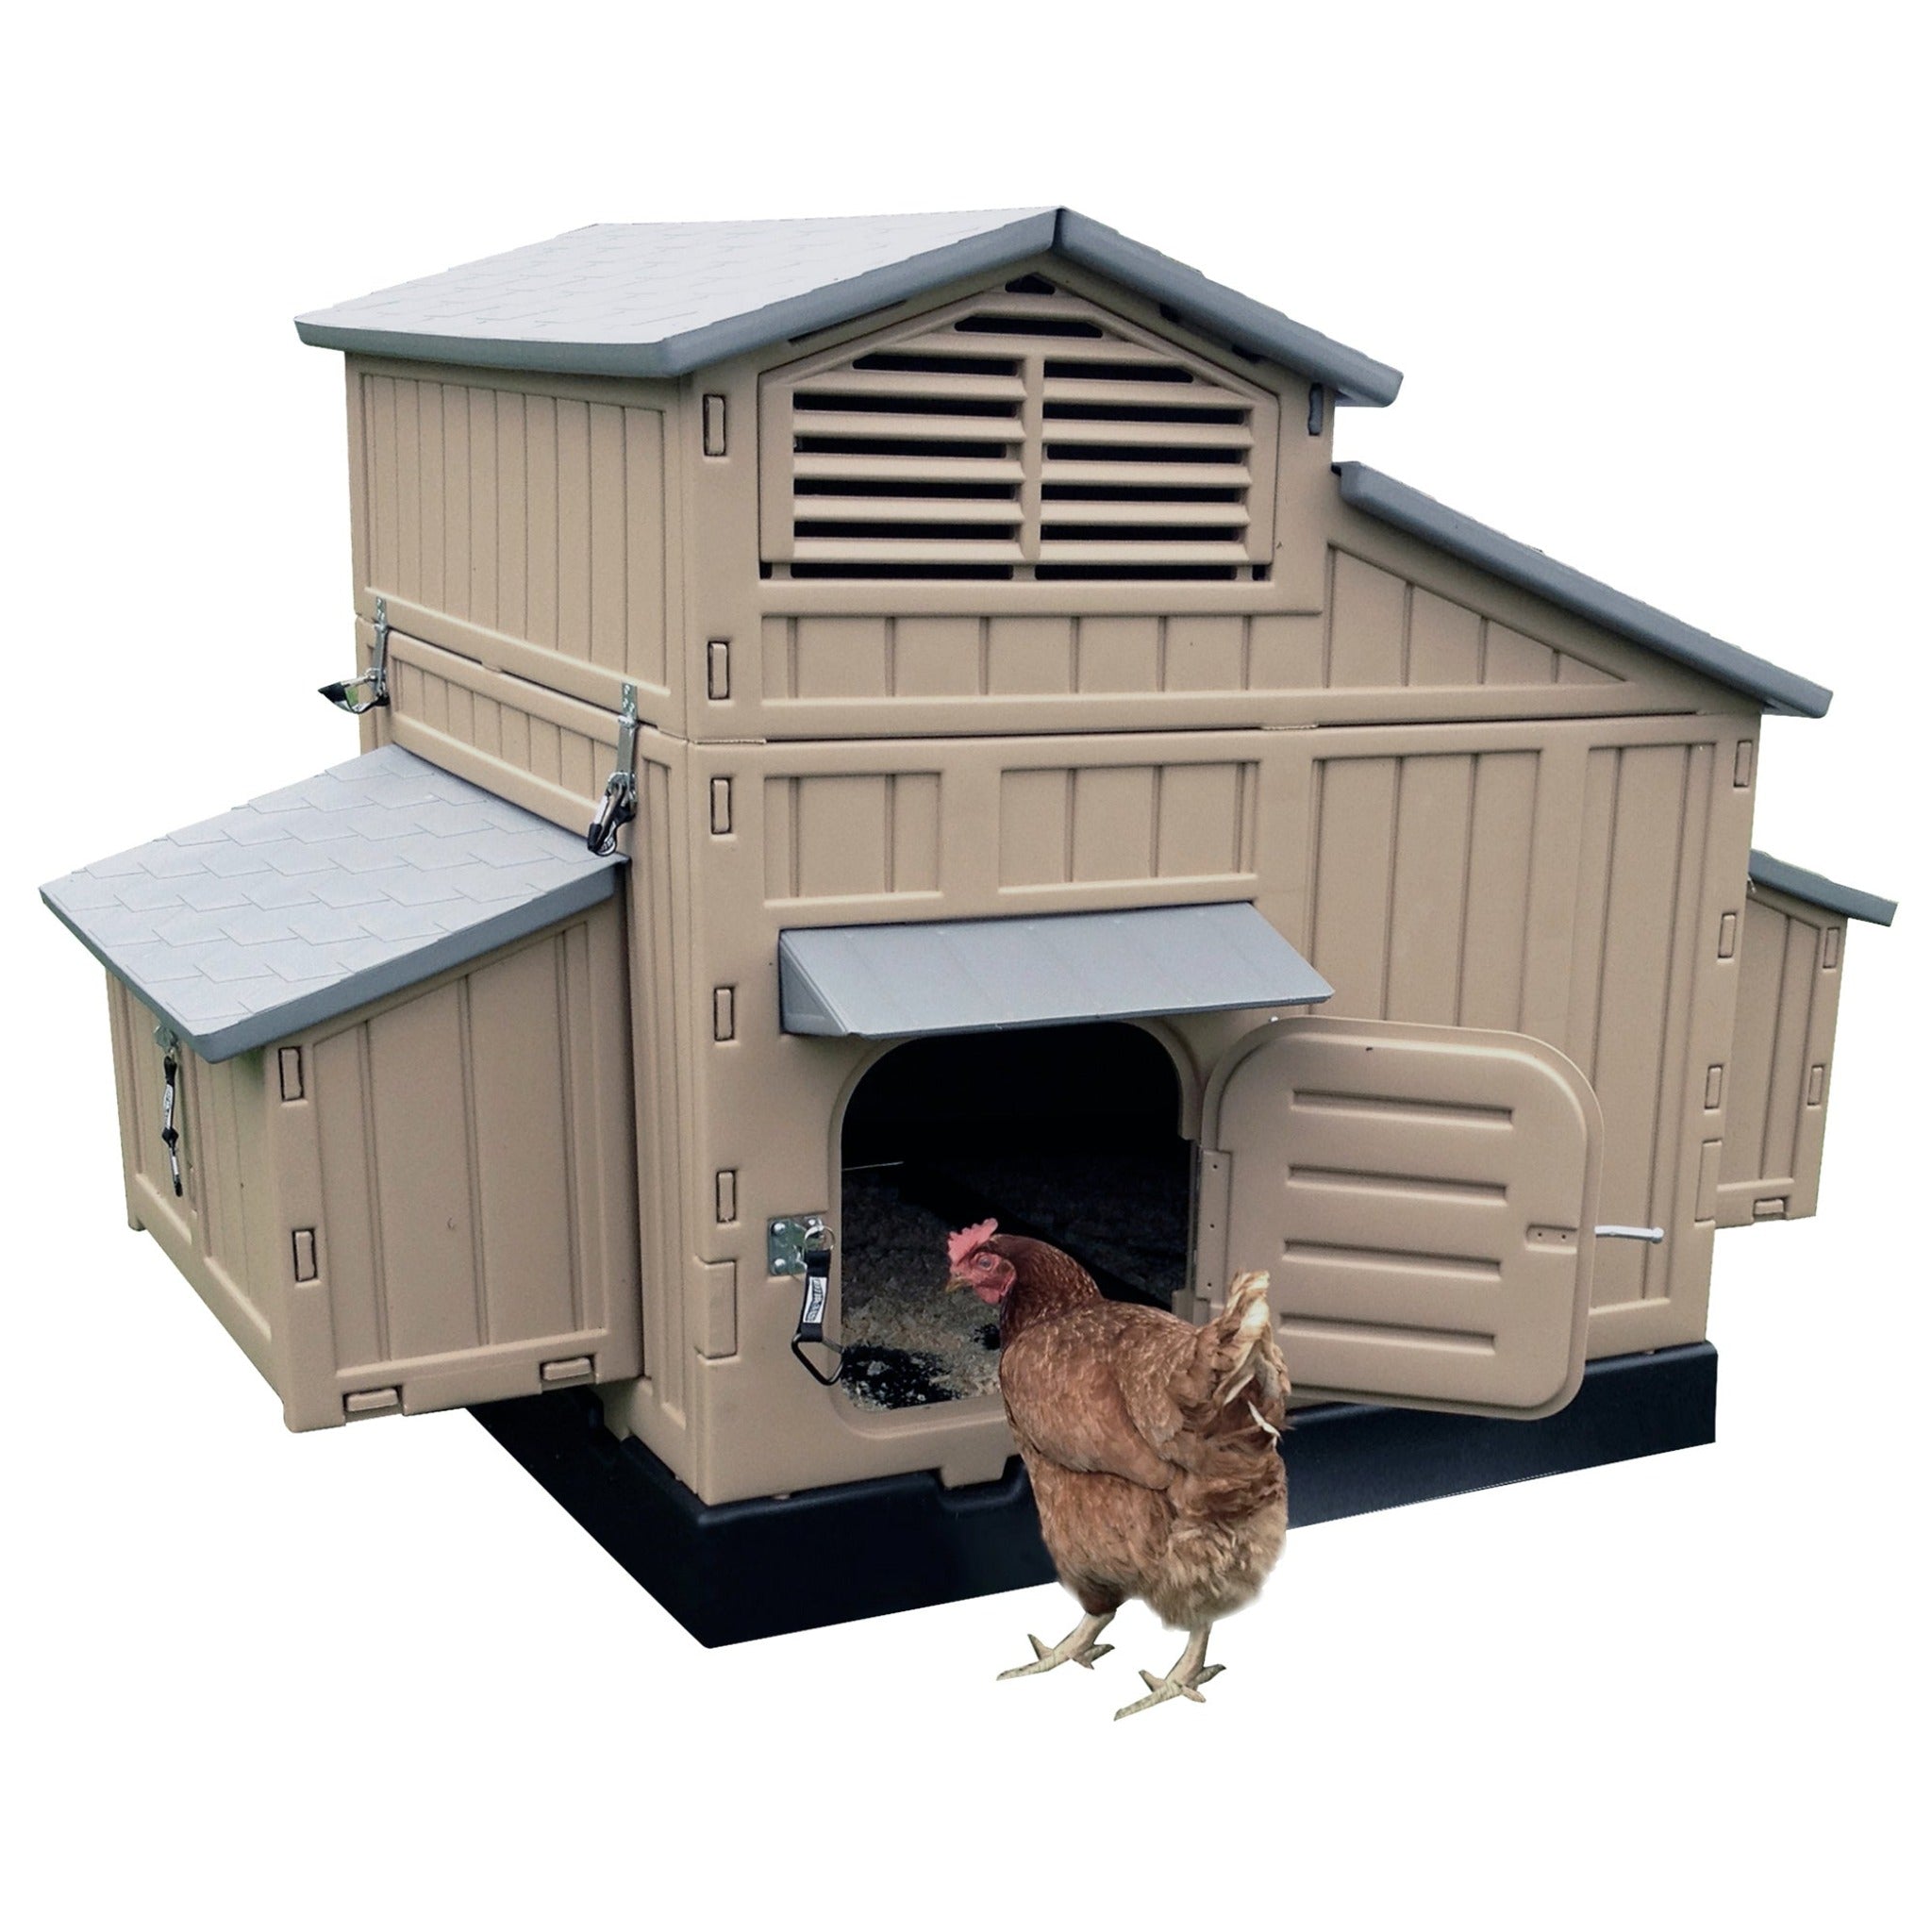 Hatching Time. Formex Large chicken coop front view with chicken standing outside of it. Large enough for 8 chickens.